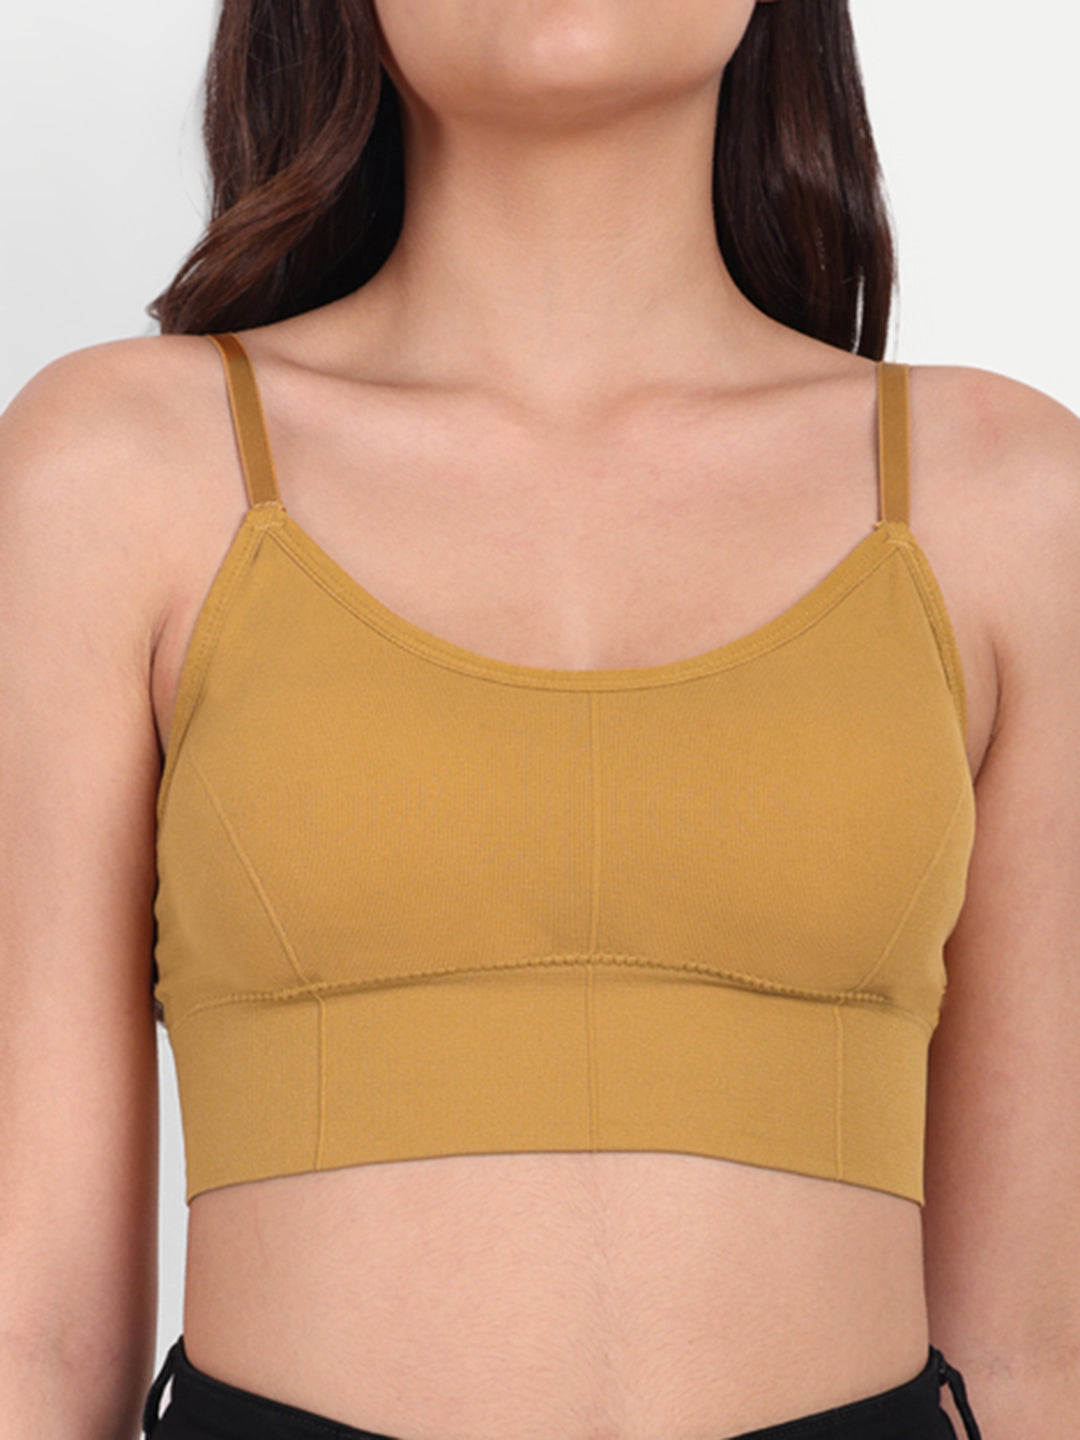 Pack Of 3 Women's Cami Crop Top Bralettes Sports Bra,Yellow, Gray